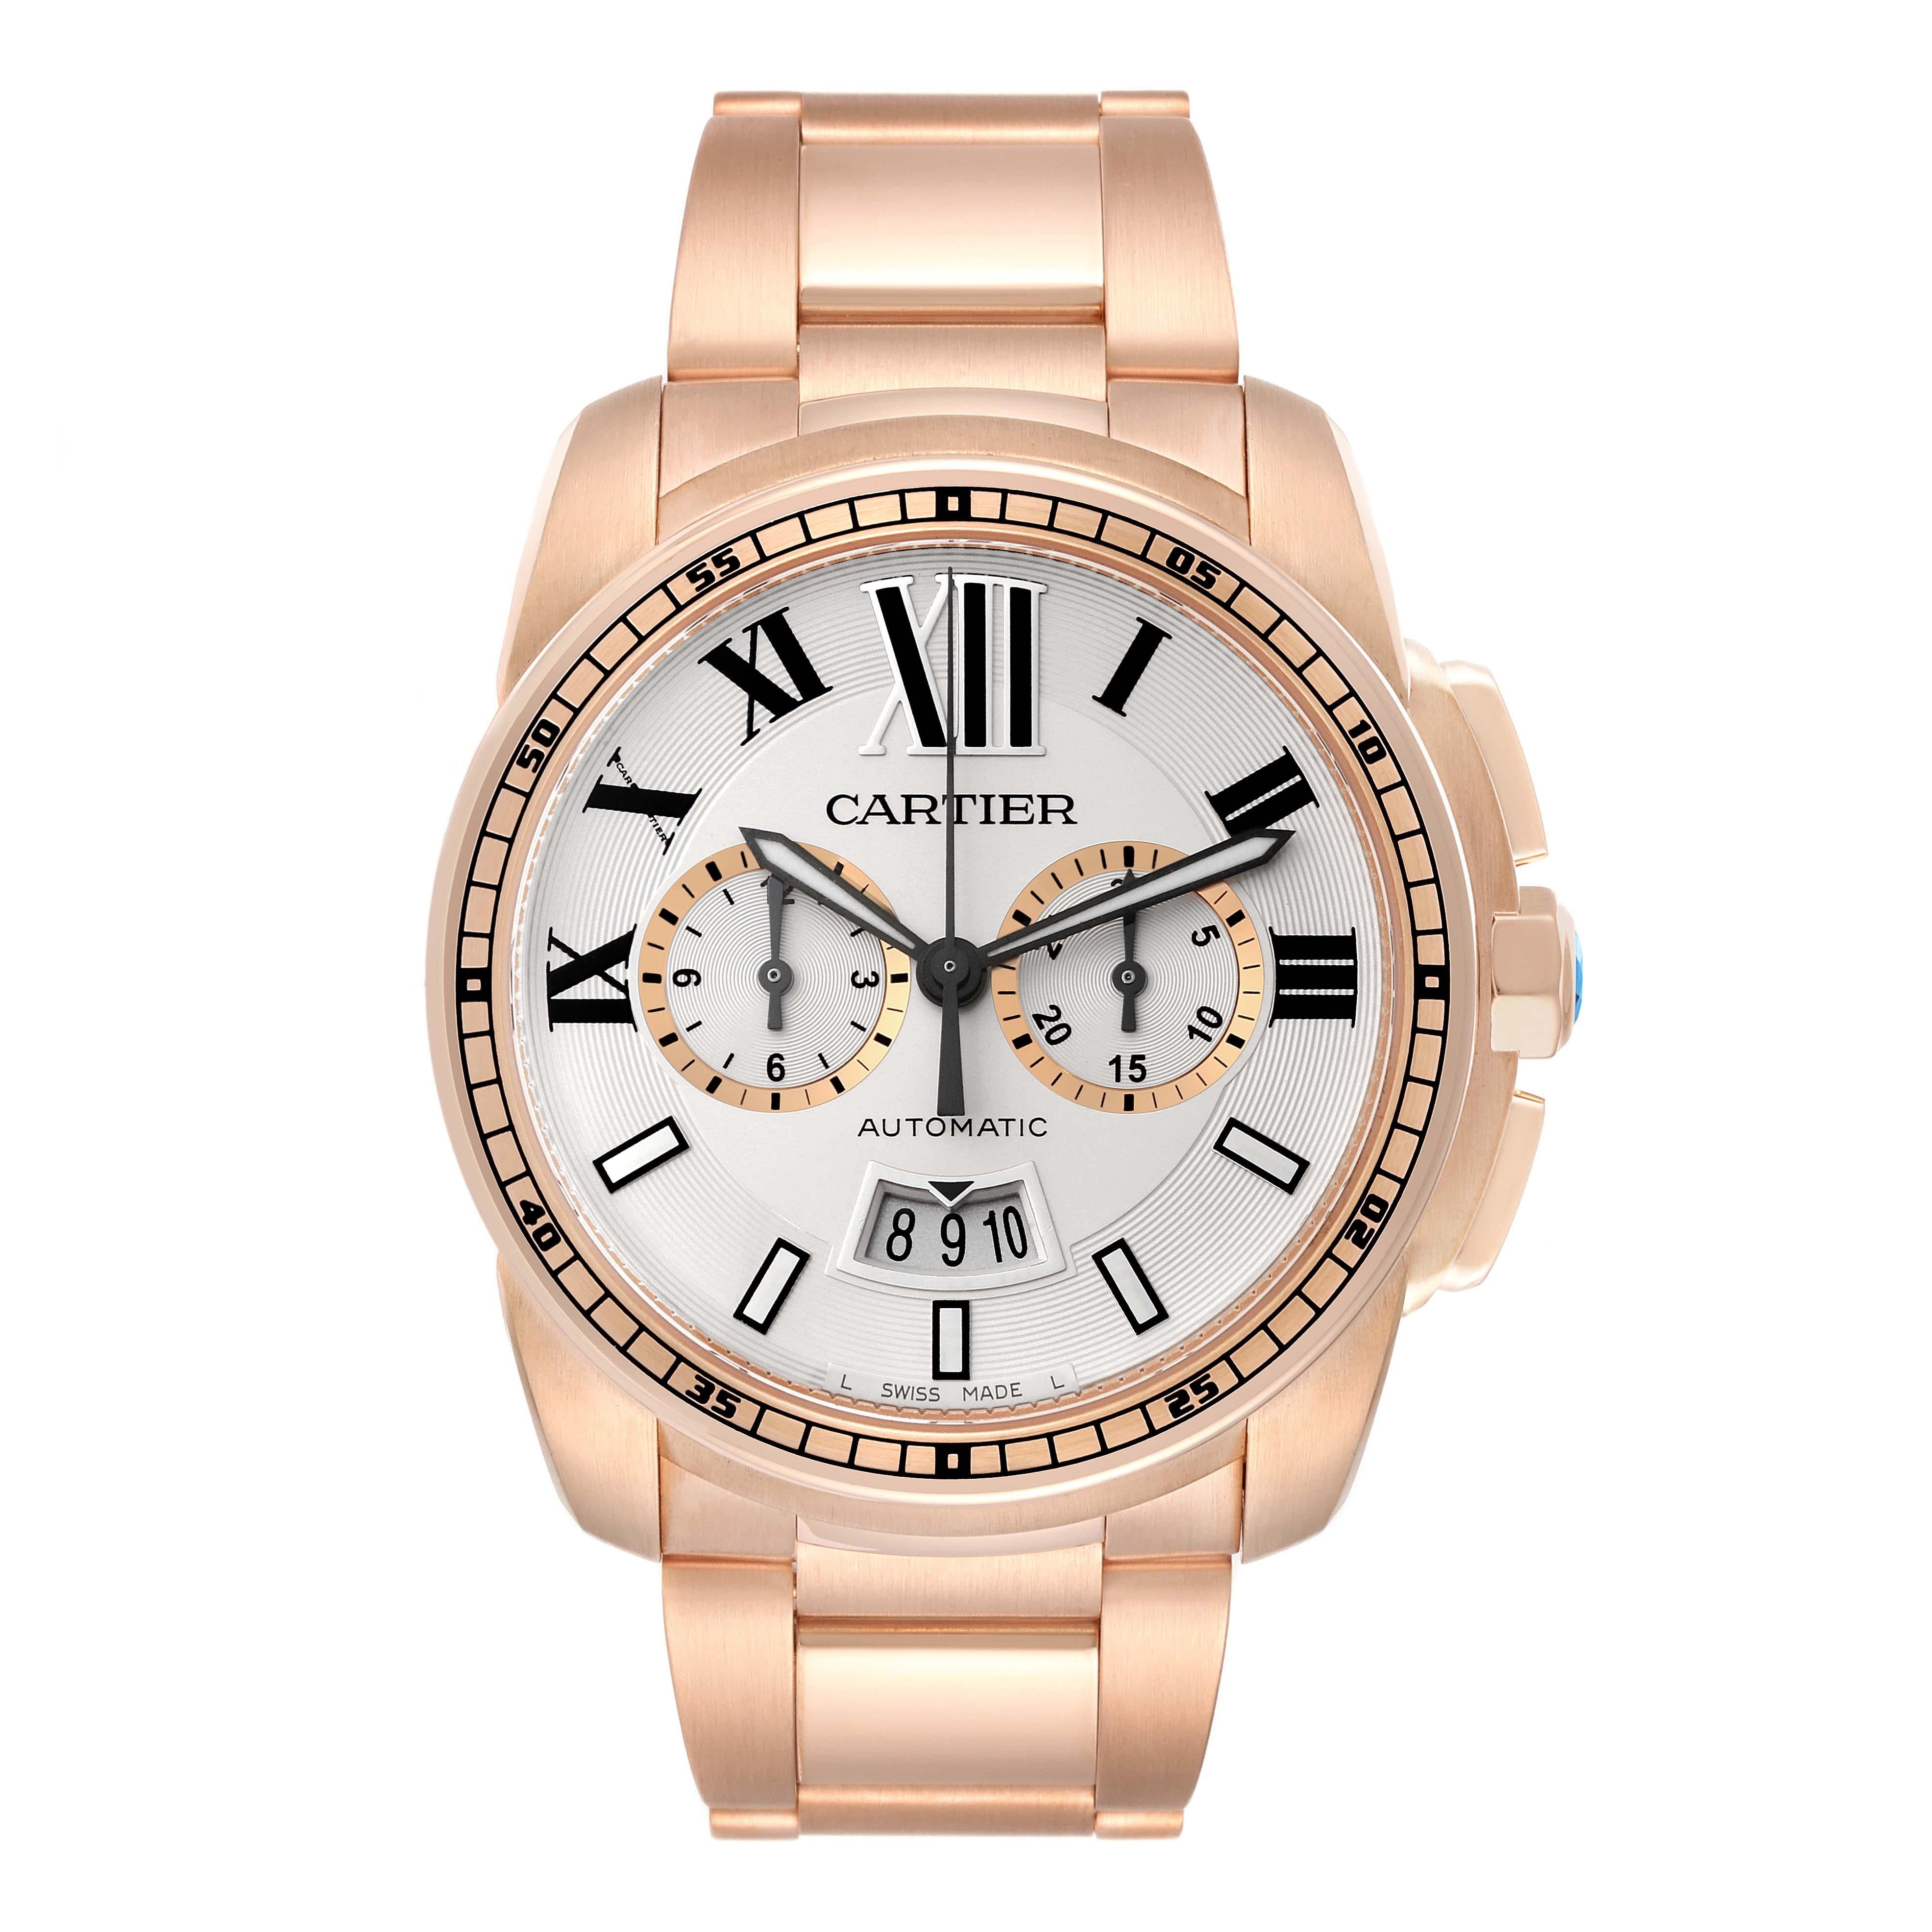 Cartier Calibre Silver Dial Rose Gold Chronograph Mens Watch W7100047 Papers. Automatic self-winding chronograph movement. 18K rose gold round case 42 mm in diameter. Case thickness: 12.6 mm. 18K rose gold crown set with faceted blue sapphire.